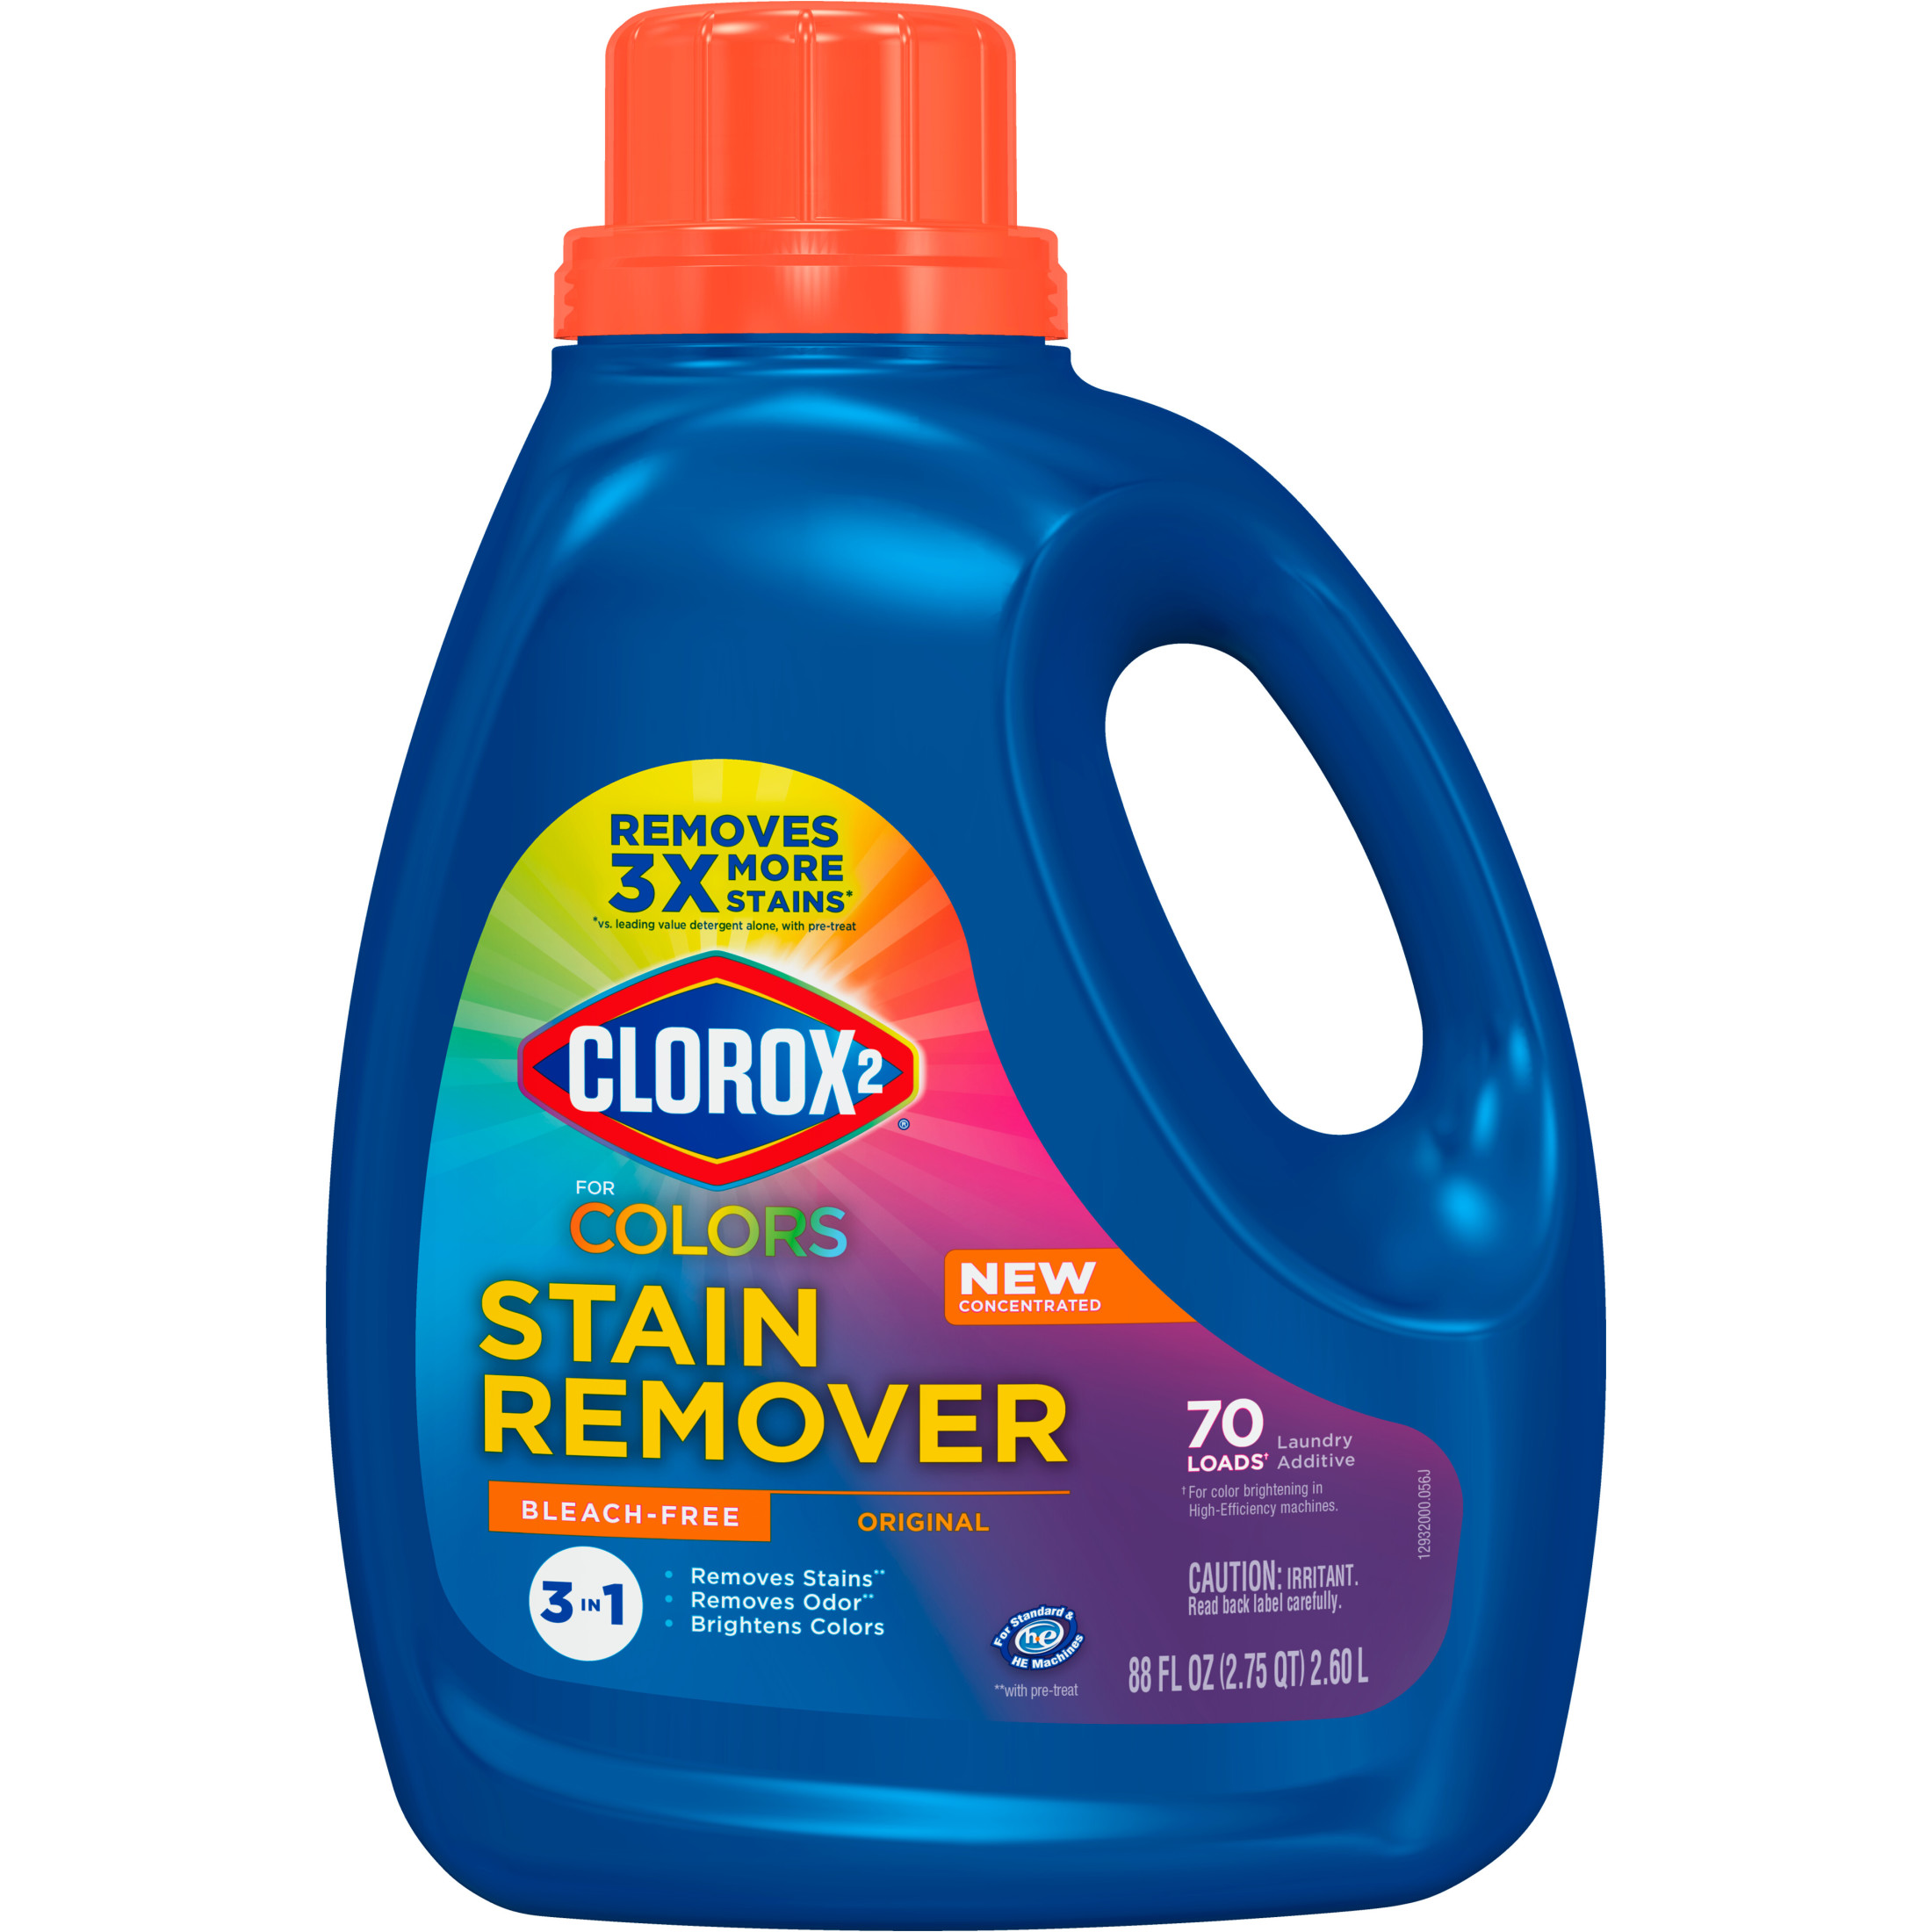 Clorox 2 for Colors Stain Remover and Laundry Additive, Bleach Free, Original, 88 Fluid Ounces - image 3 of 11